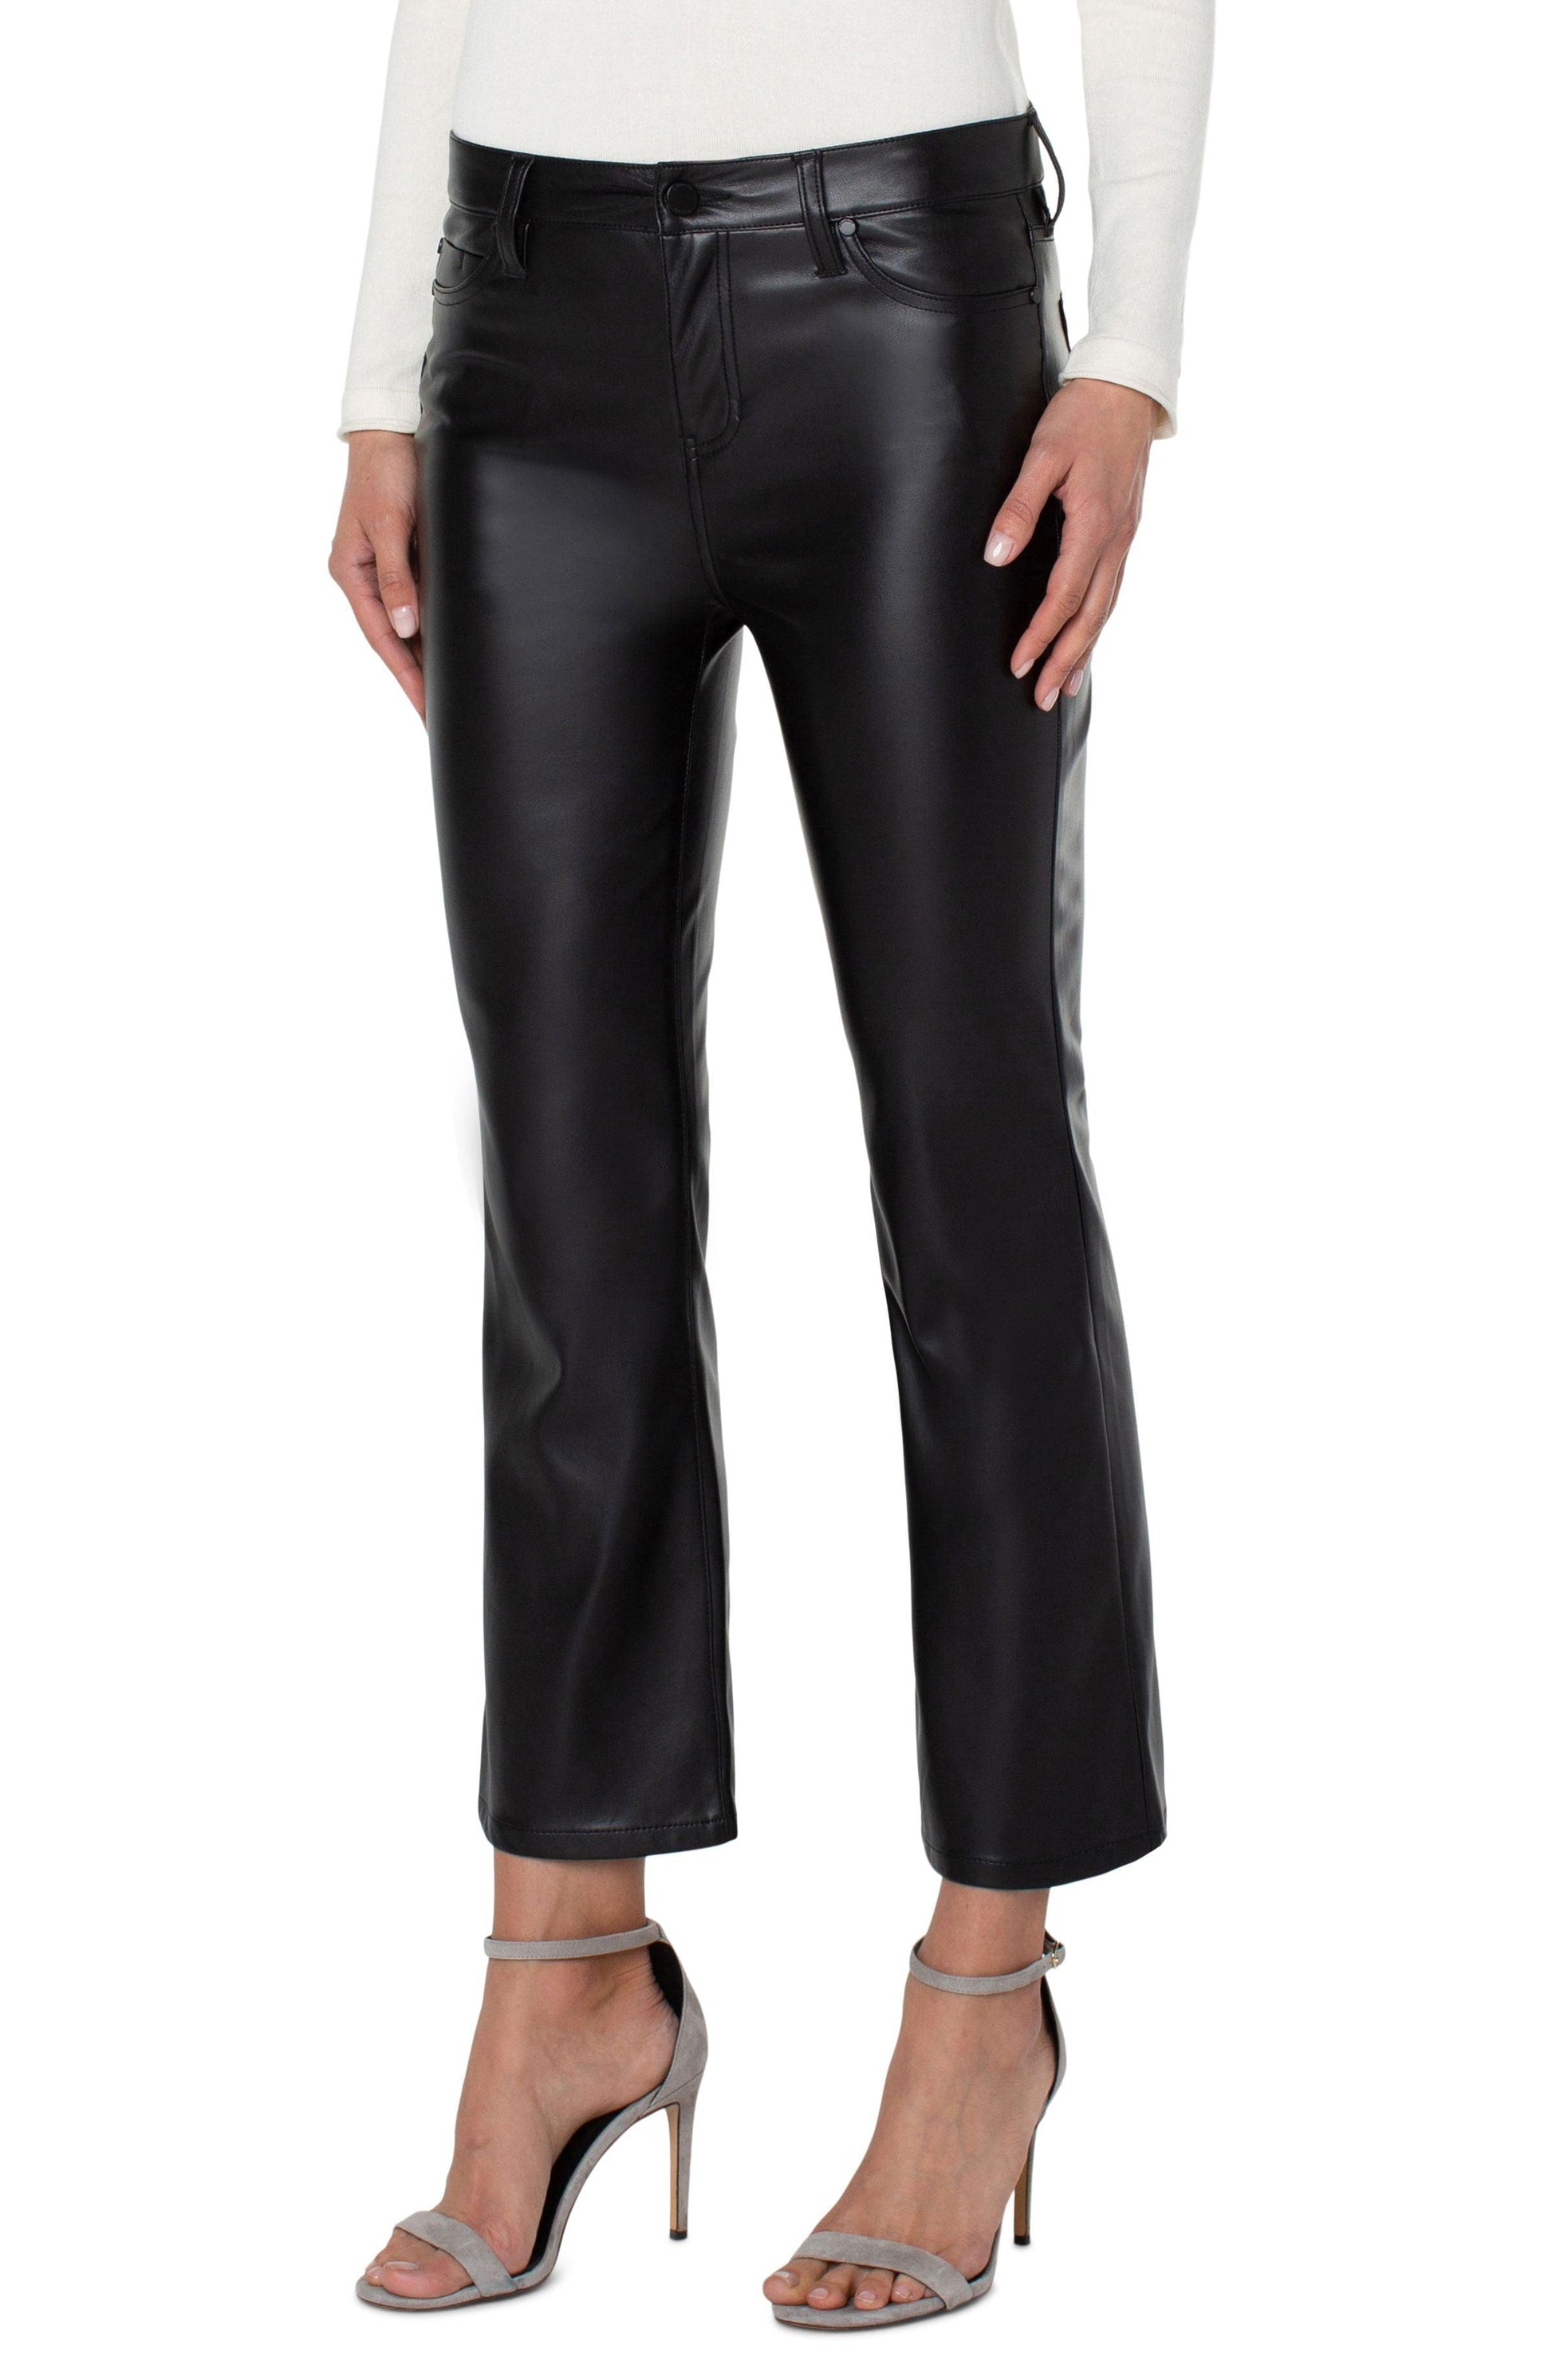 Black Liverpool Hannah Ankle Flare Faux Leather Pants - Strawberry Moon Boutique